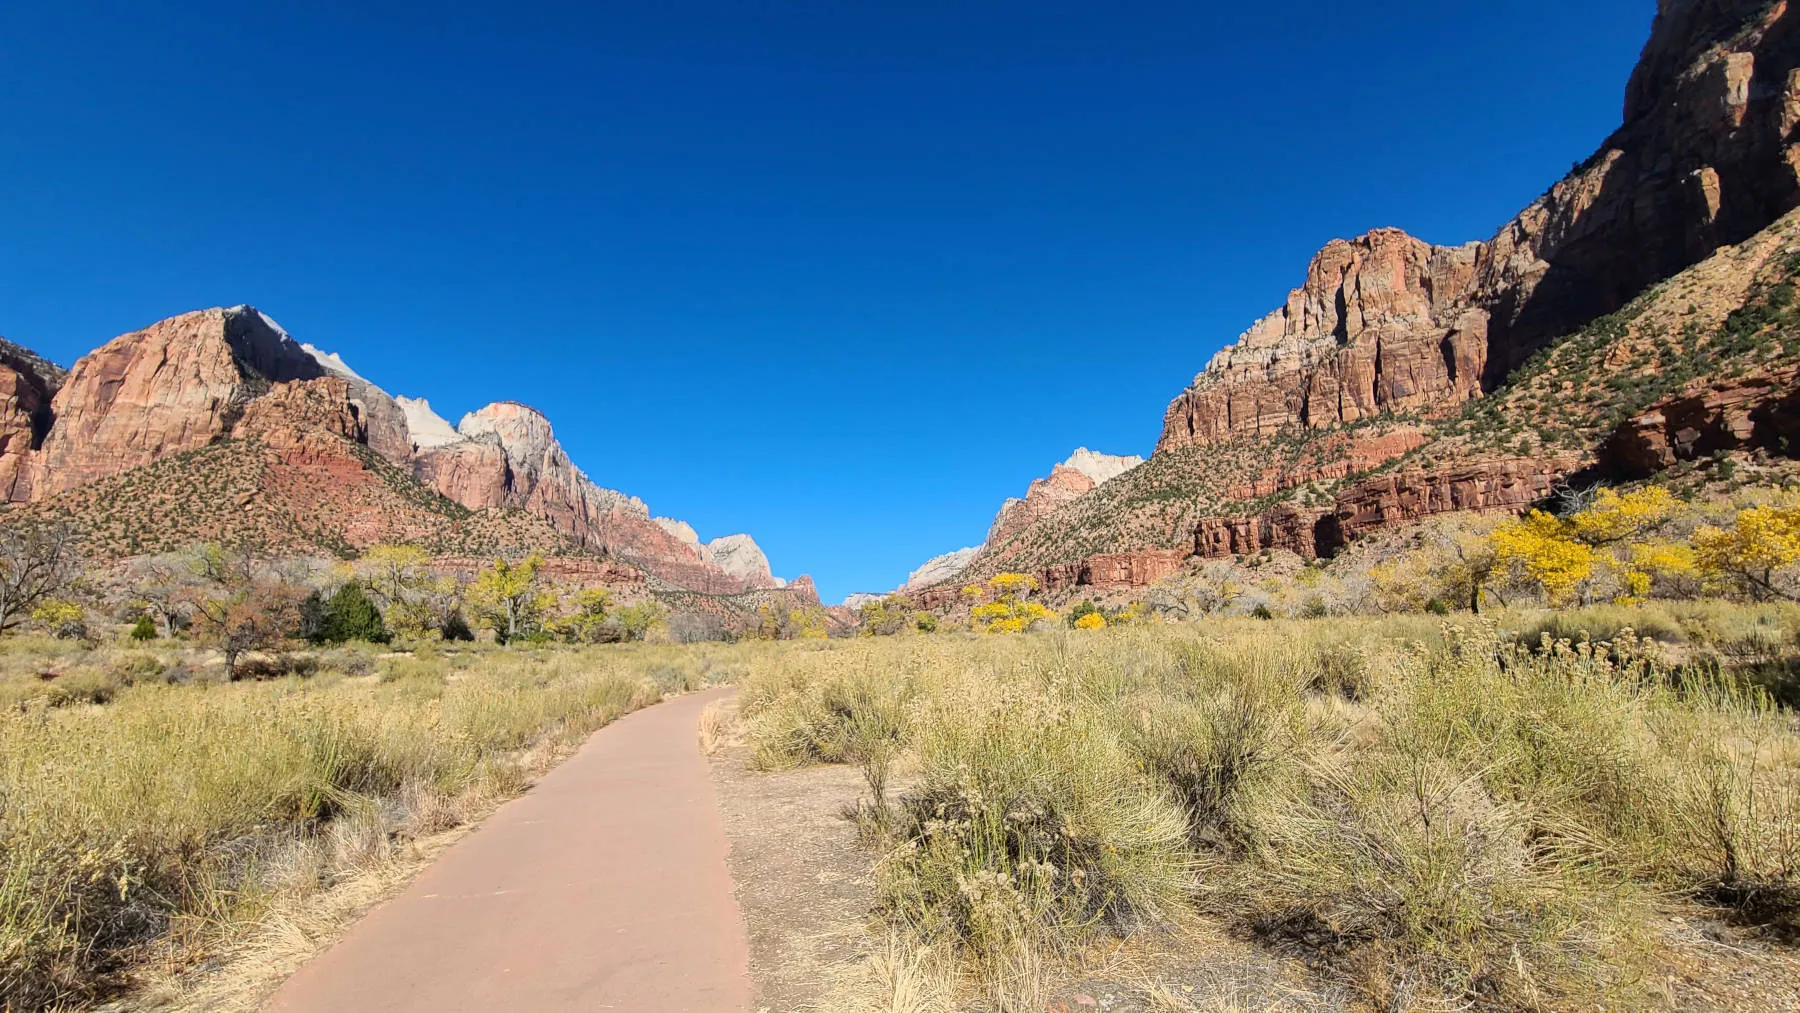 The paved Pa'rus Trail in Zion is great for walking, biking and is wheelchair accessible.